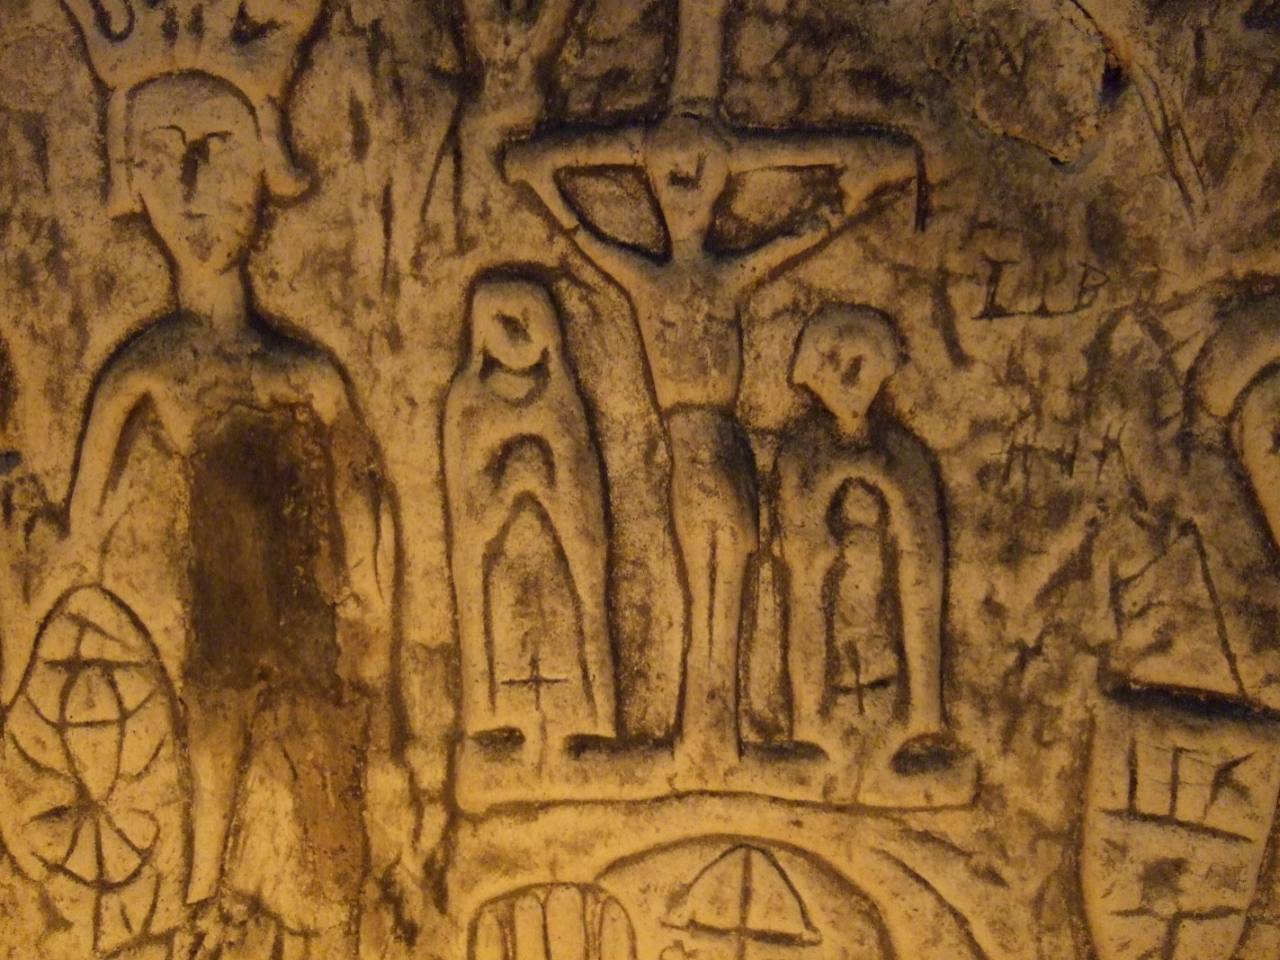 Mysterious symbols and carvings in man-made Royston Cave 5